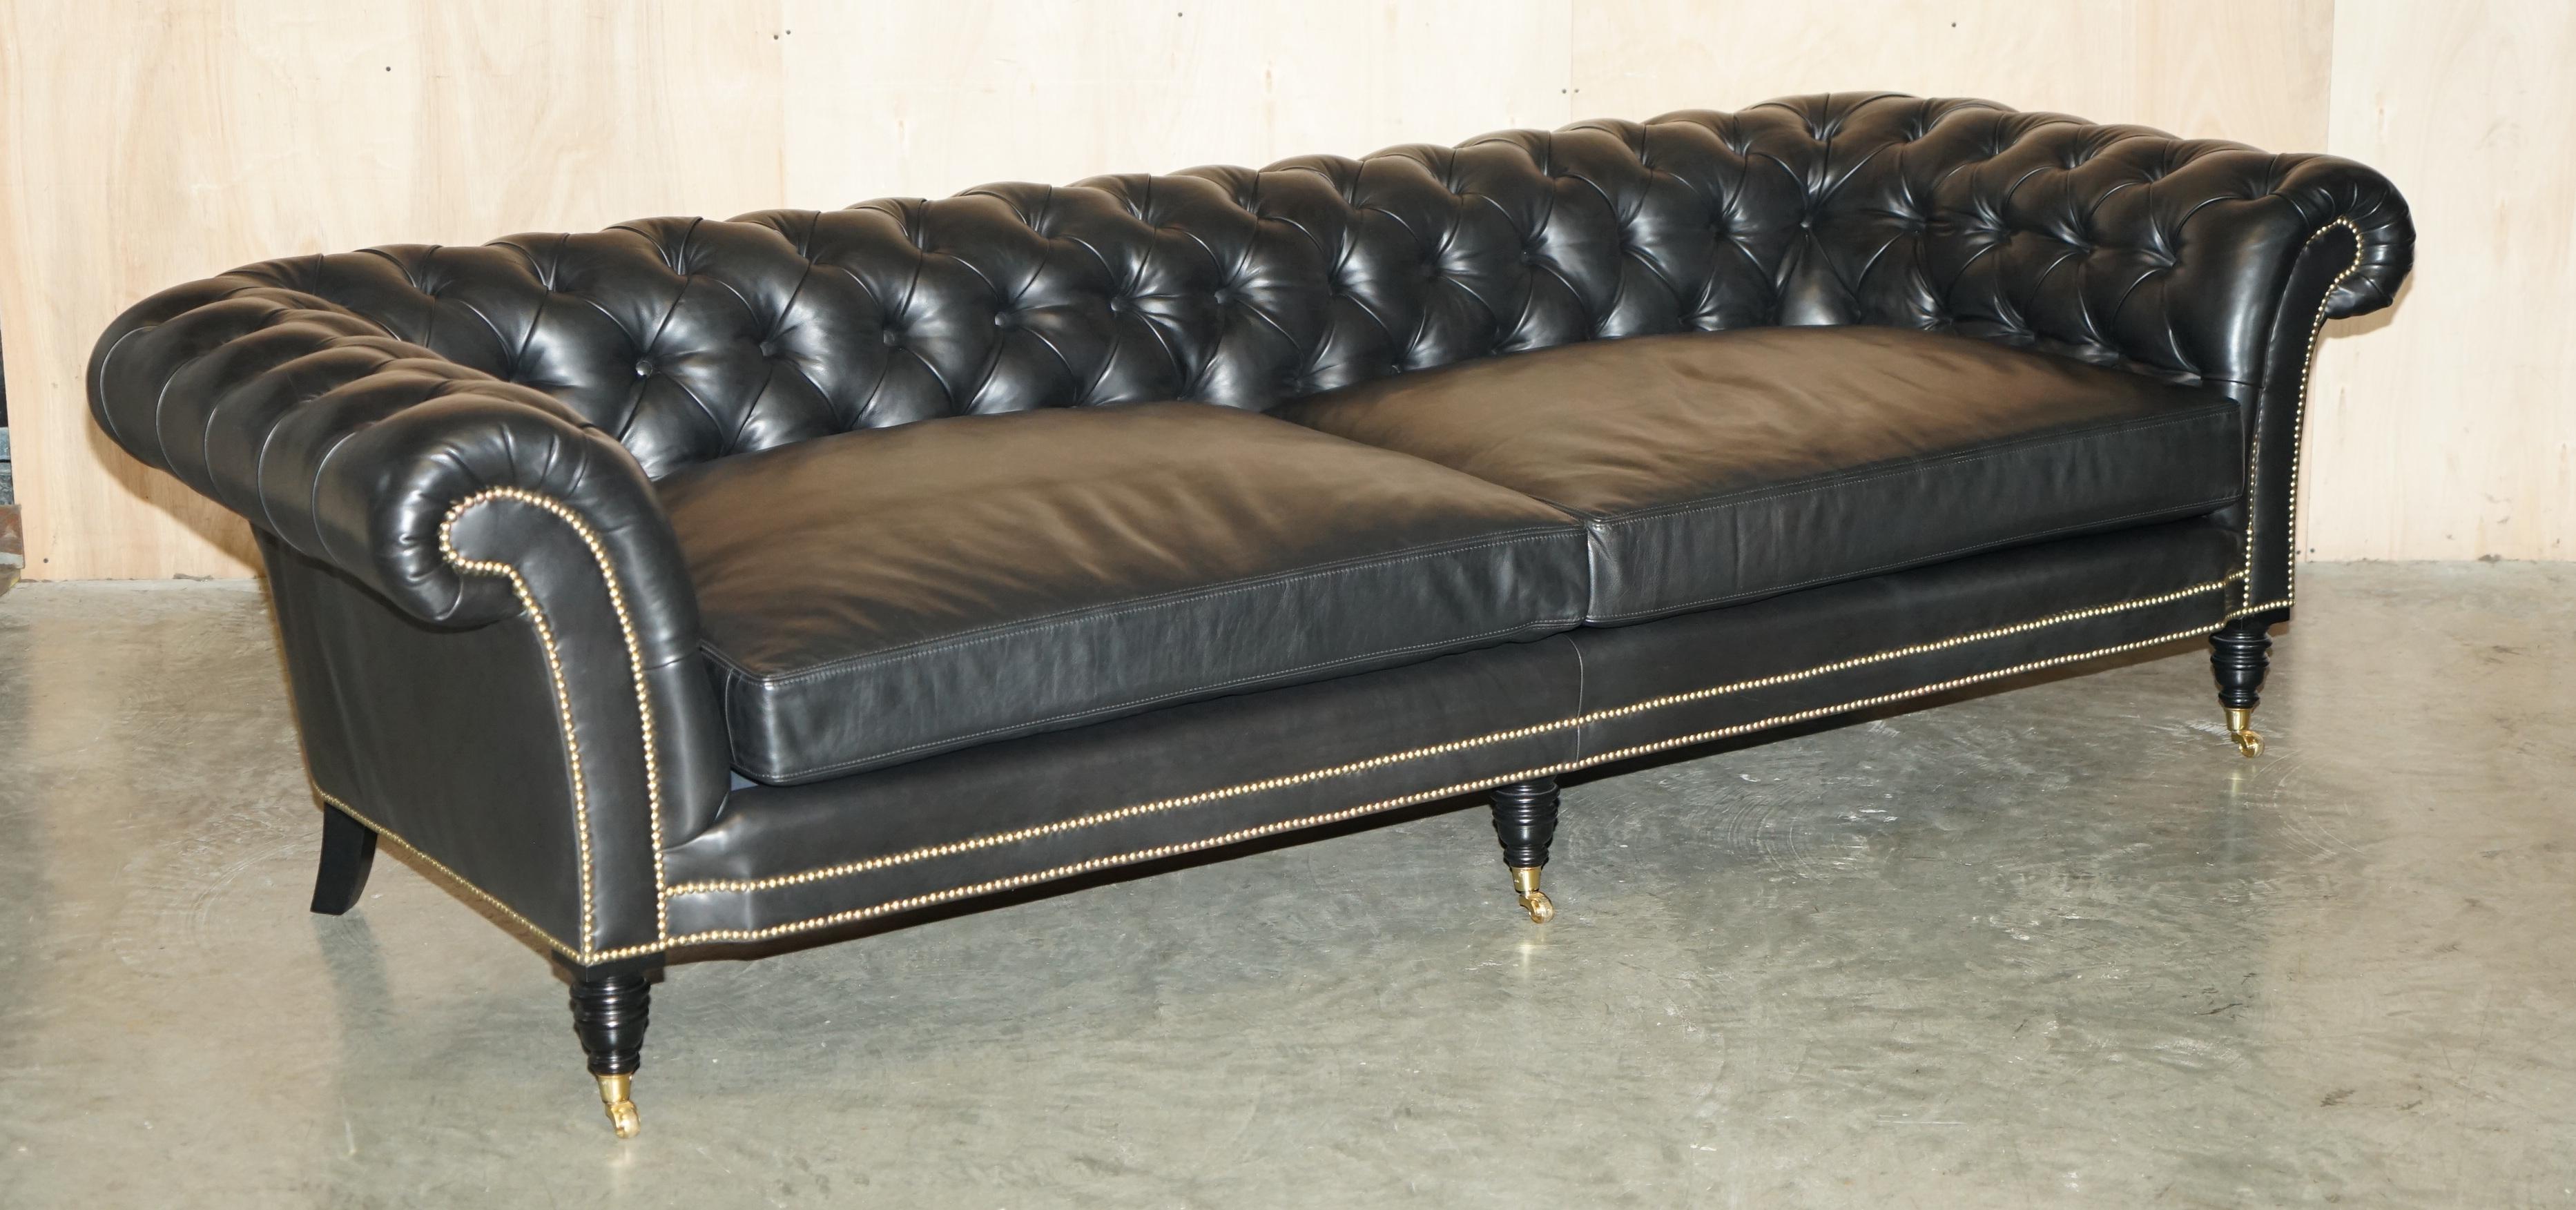 Royal House Antiques

Royal House Antiques is delighted to offer for sale this stunning pair of very large, Ralph Lauren Brook Street black leather chesterfield sofas RRP £45,590

Please note the delivery fee listed is just a guide, it covers within